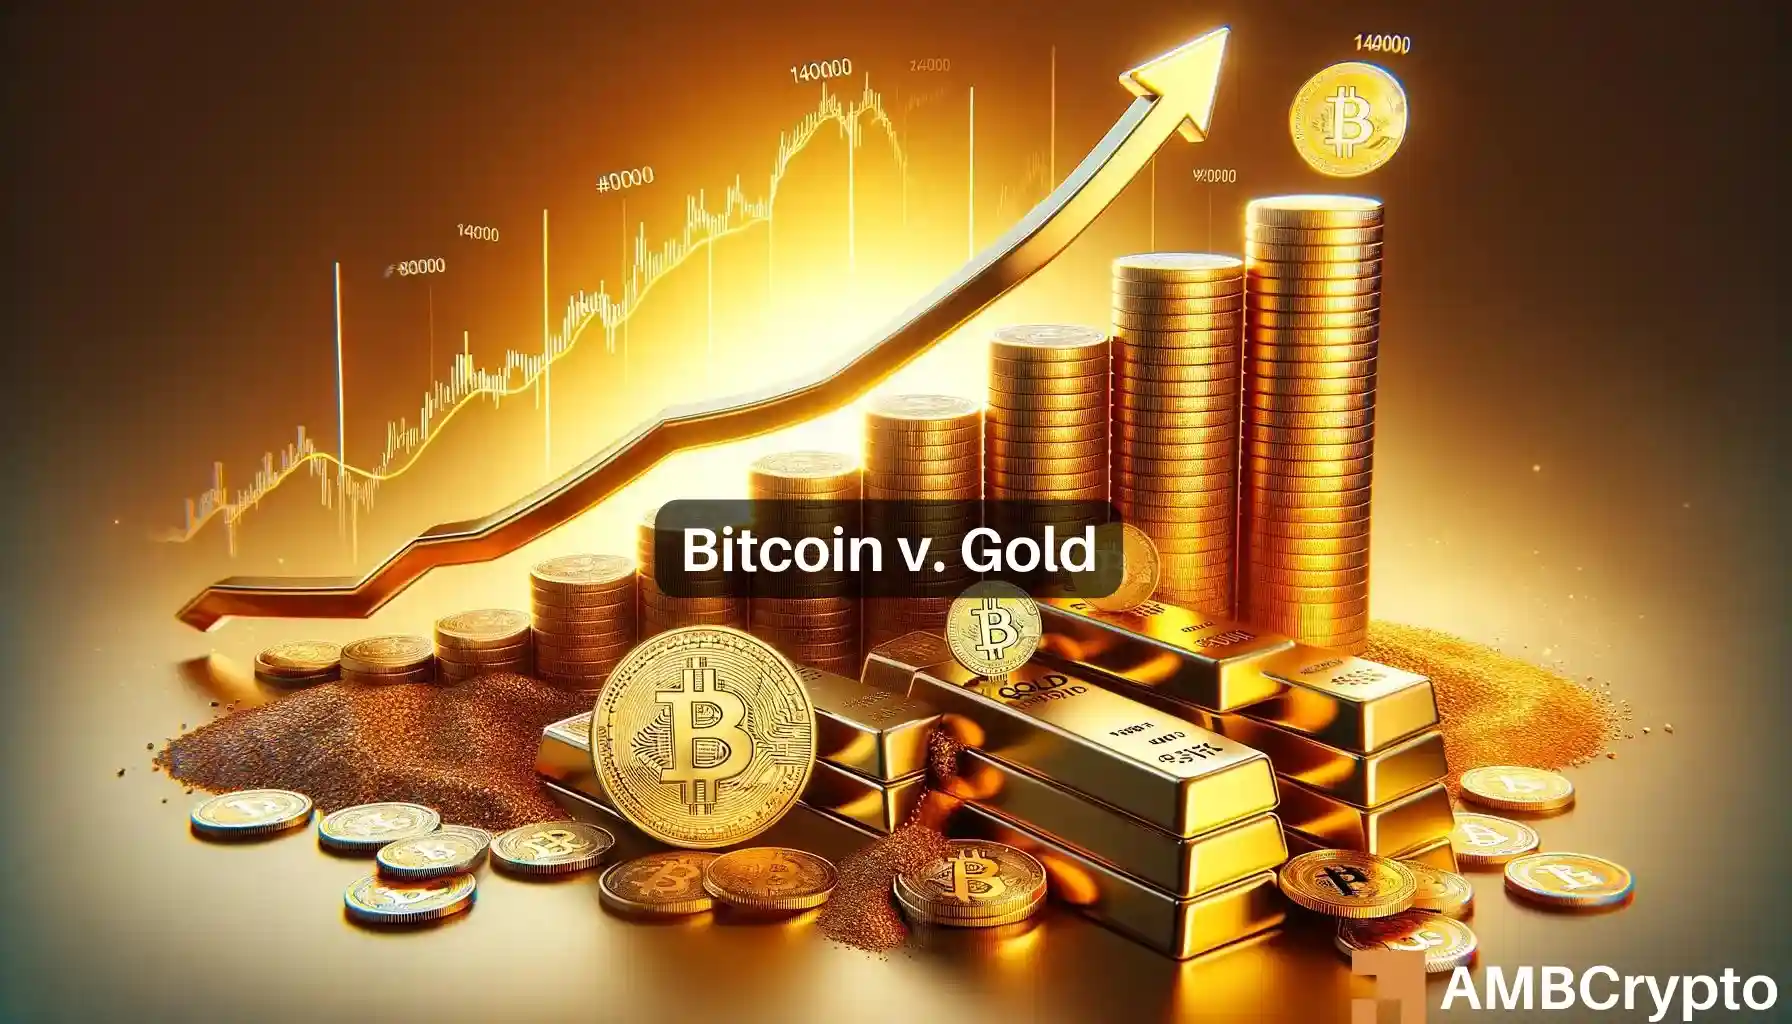 Is Bitcoin ‘losing’ to Gold right now? Here’s what Peter Schiff thinks…